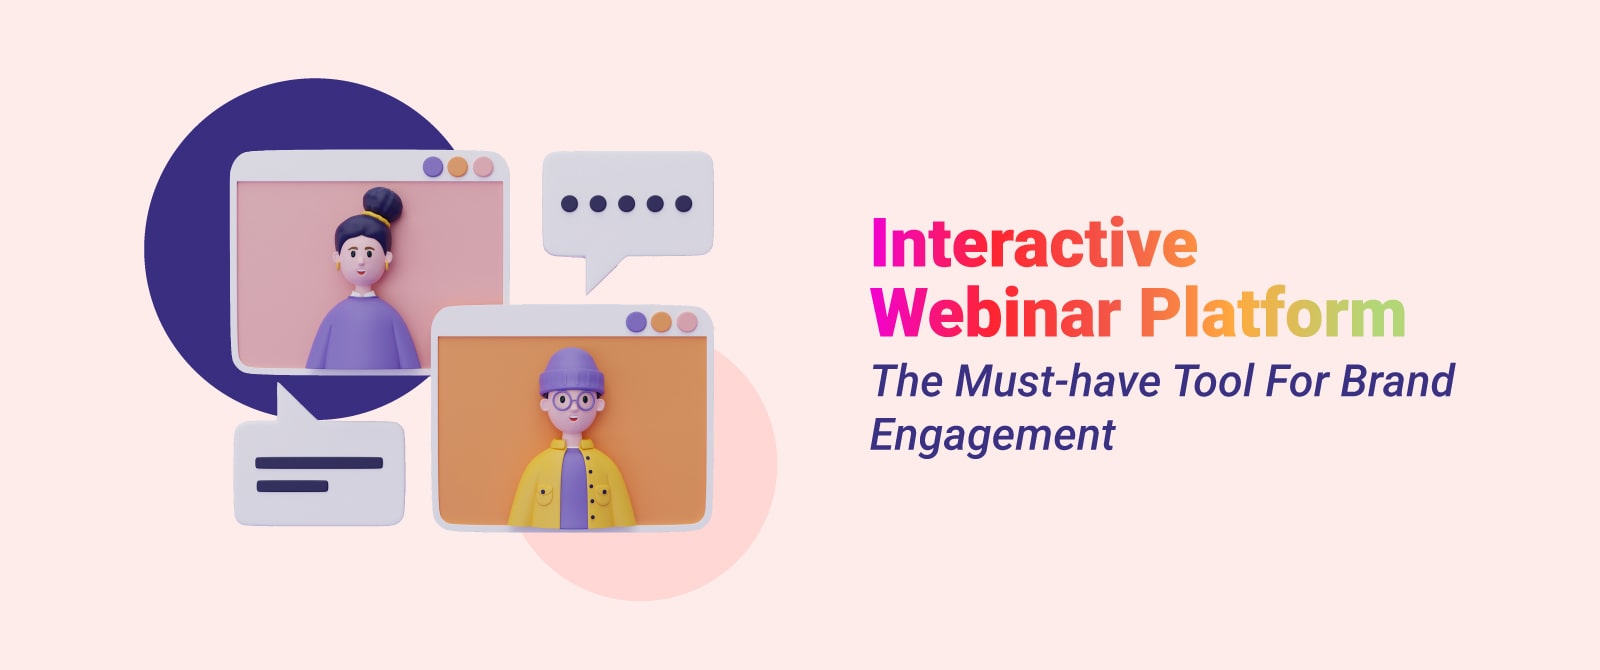 Interactive Webinar Platform : The Must-have Tool For Brand Engagement